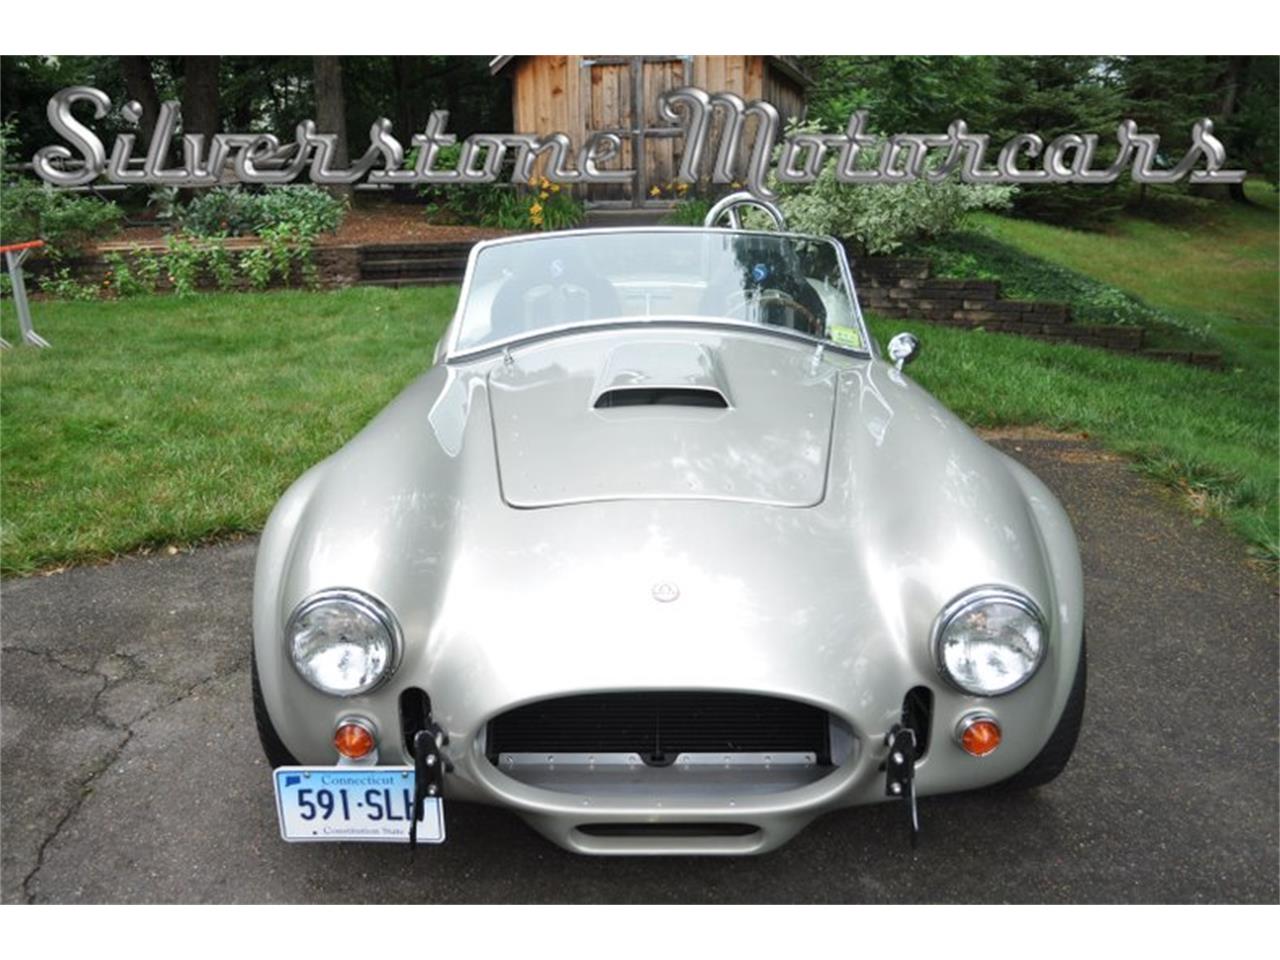 2003 Factory Five MK1 for sale in North Andover, MA – photo 2